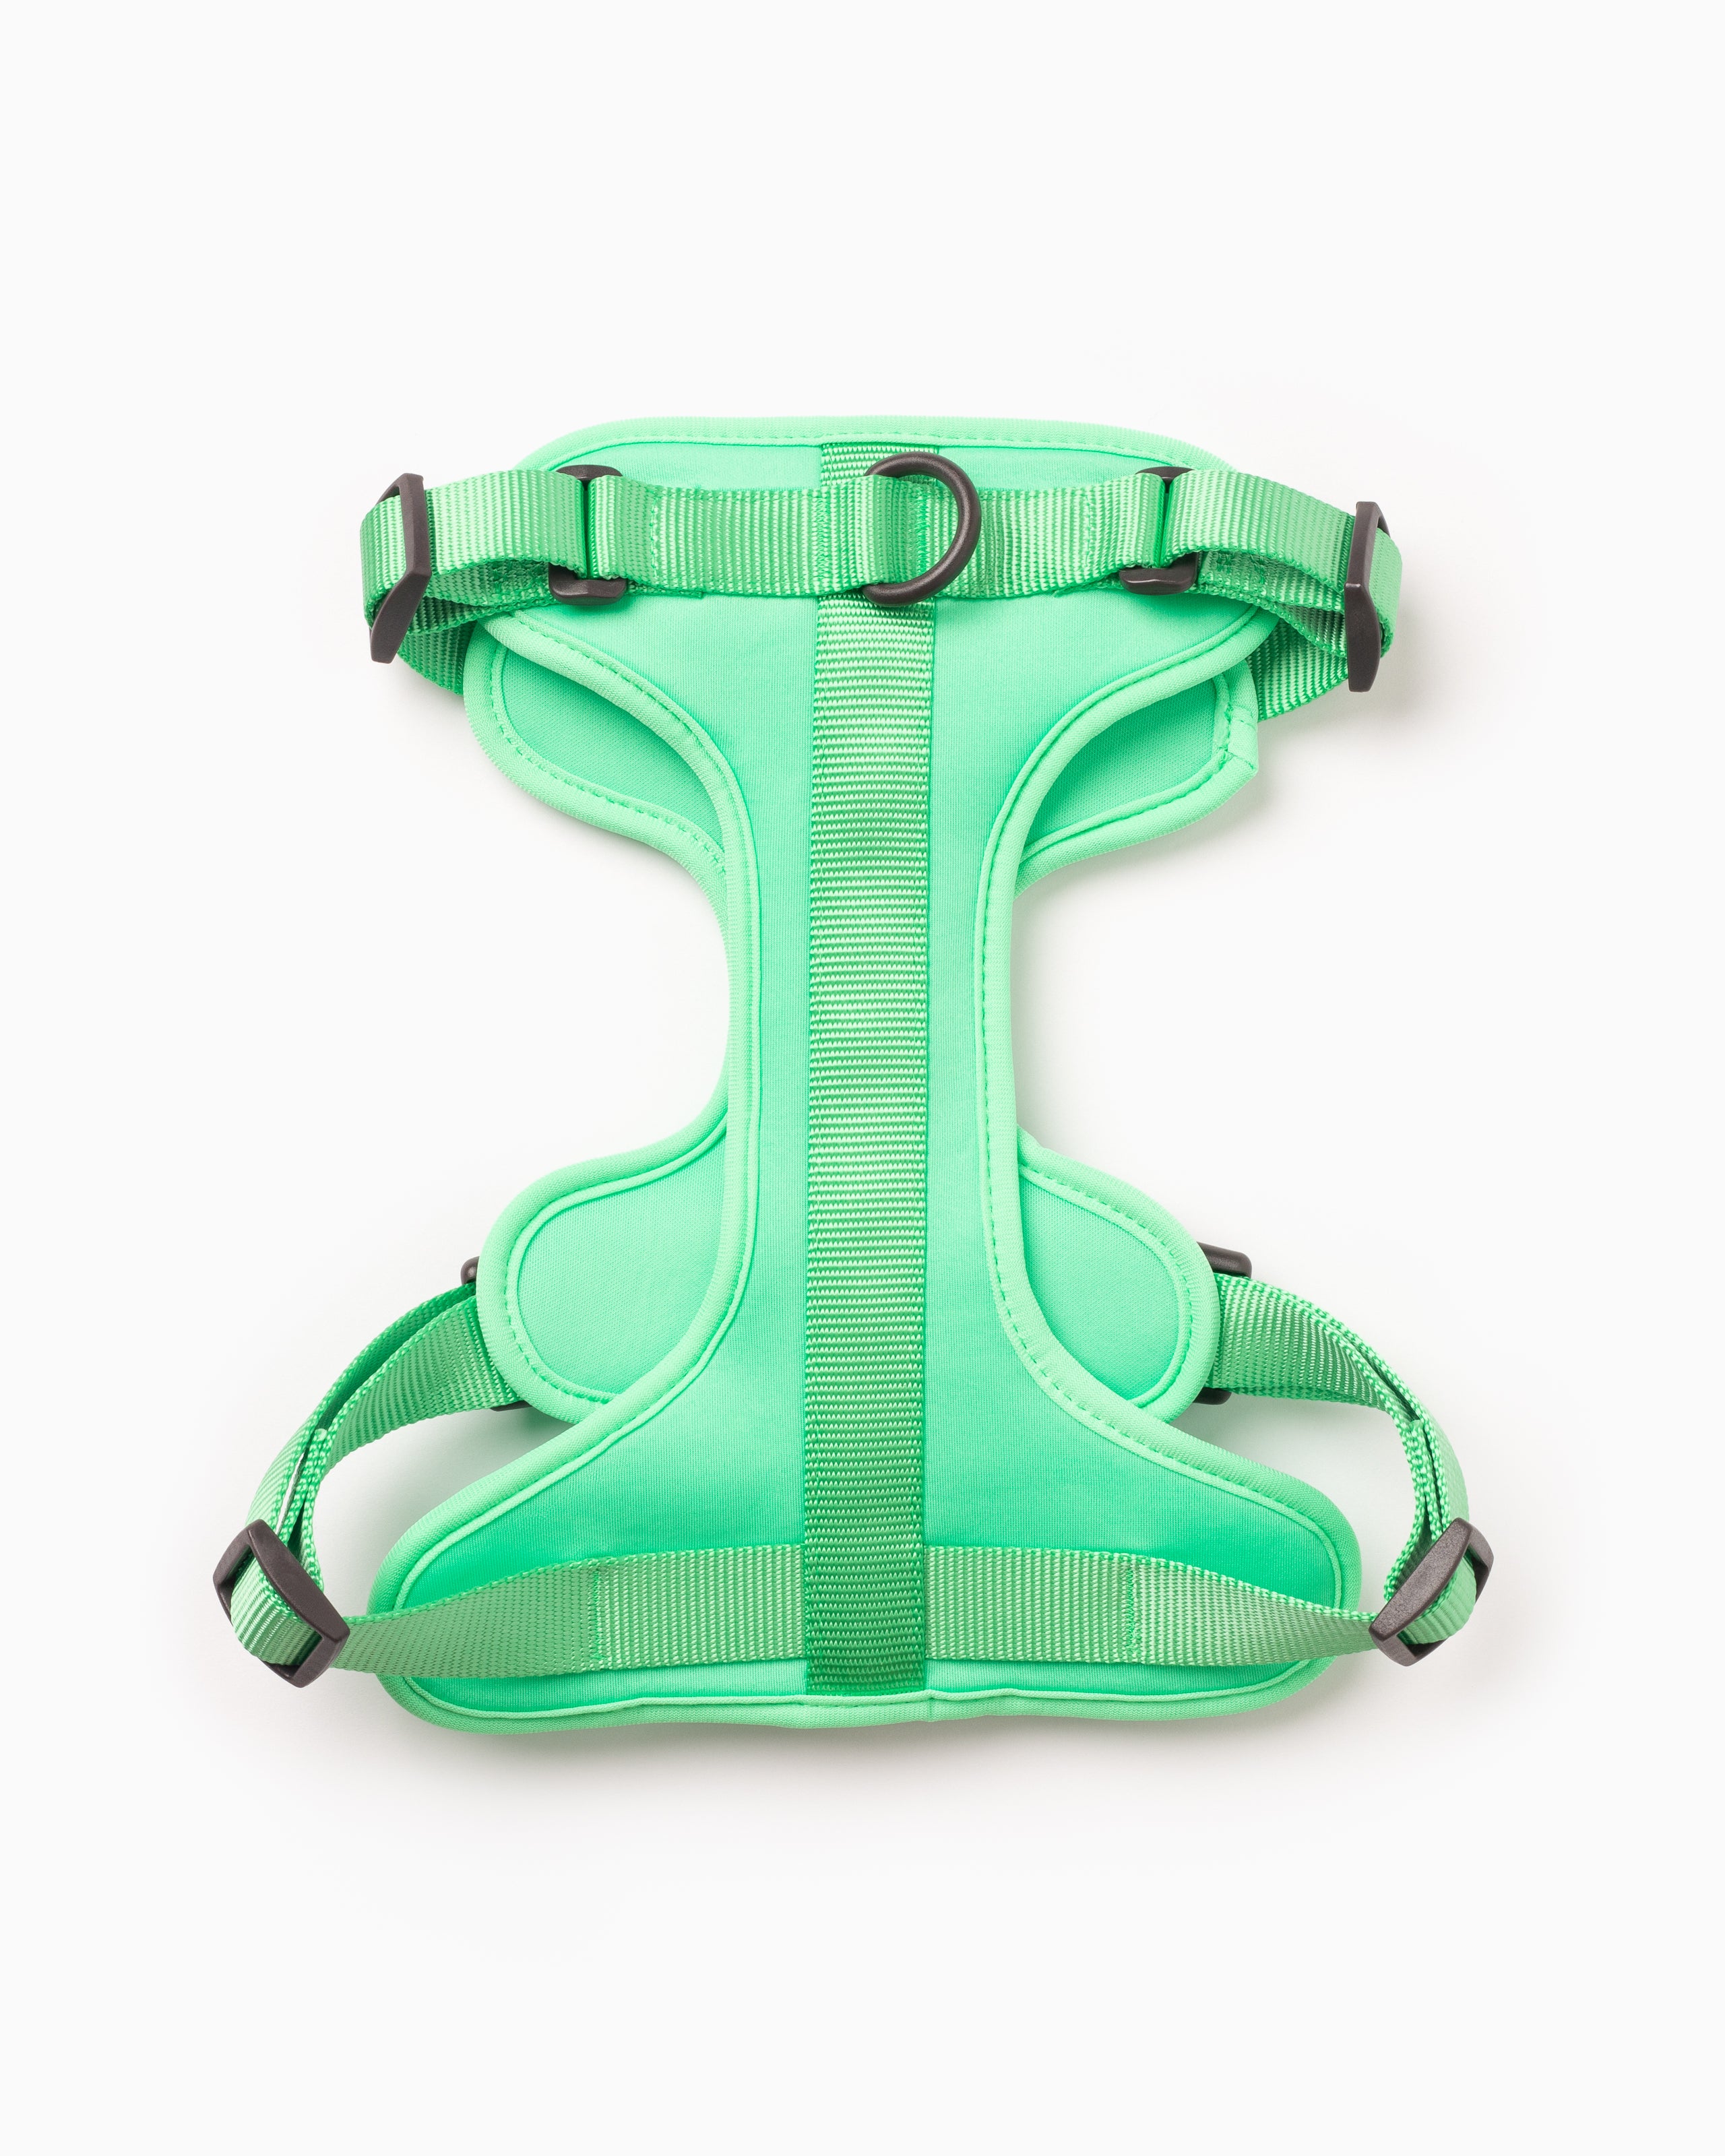 Spearmint green lightweight two tone dog harness with three d-ring attachments & high quality buckles.